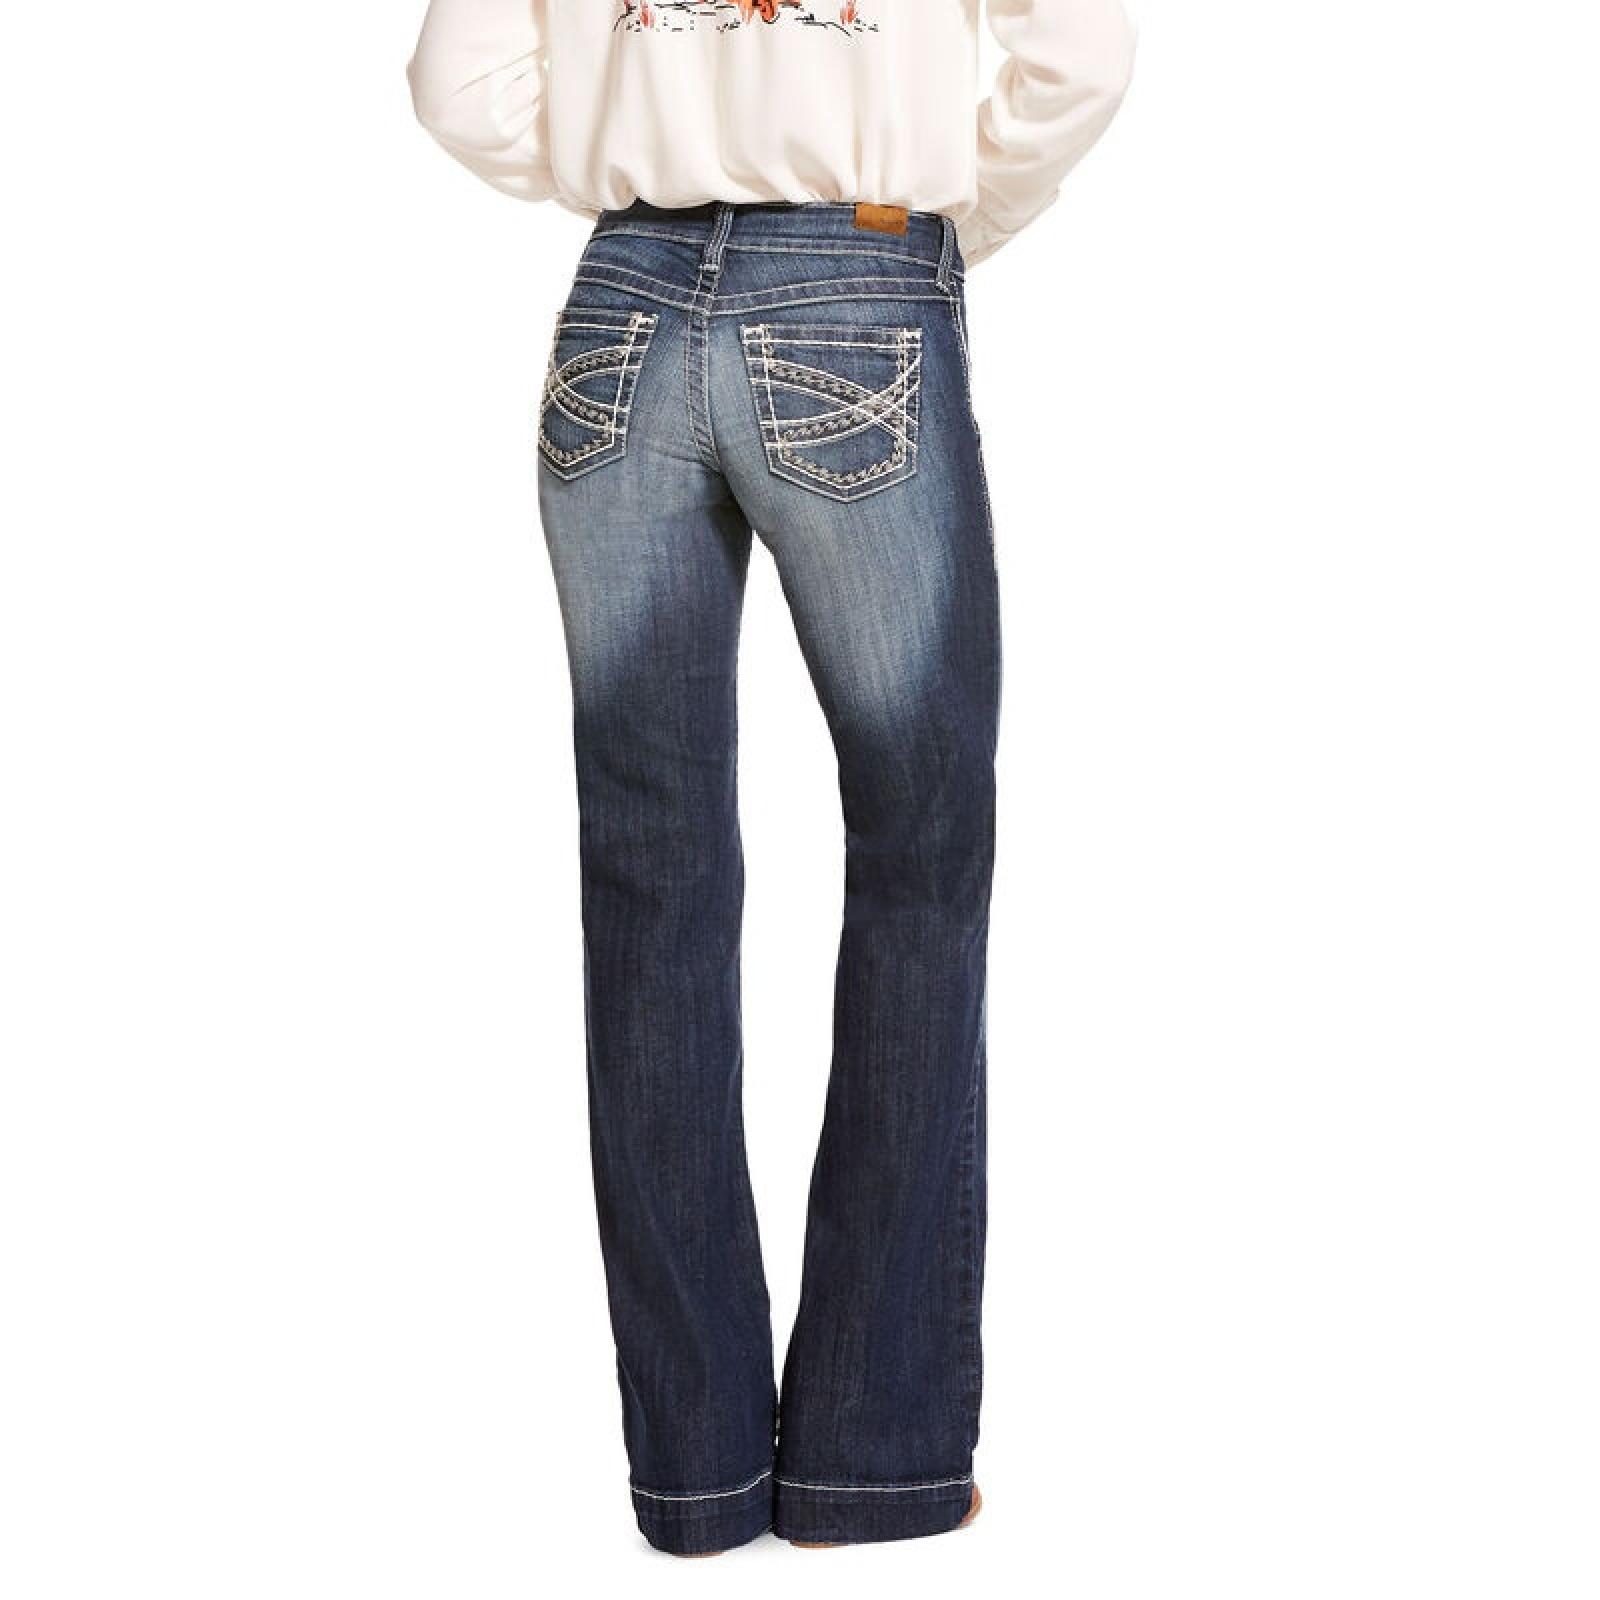 Ariat Trouser Mid Rise Stretch Entwined Wide Leg Jean